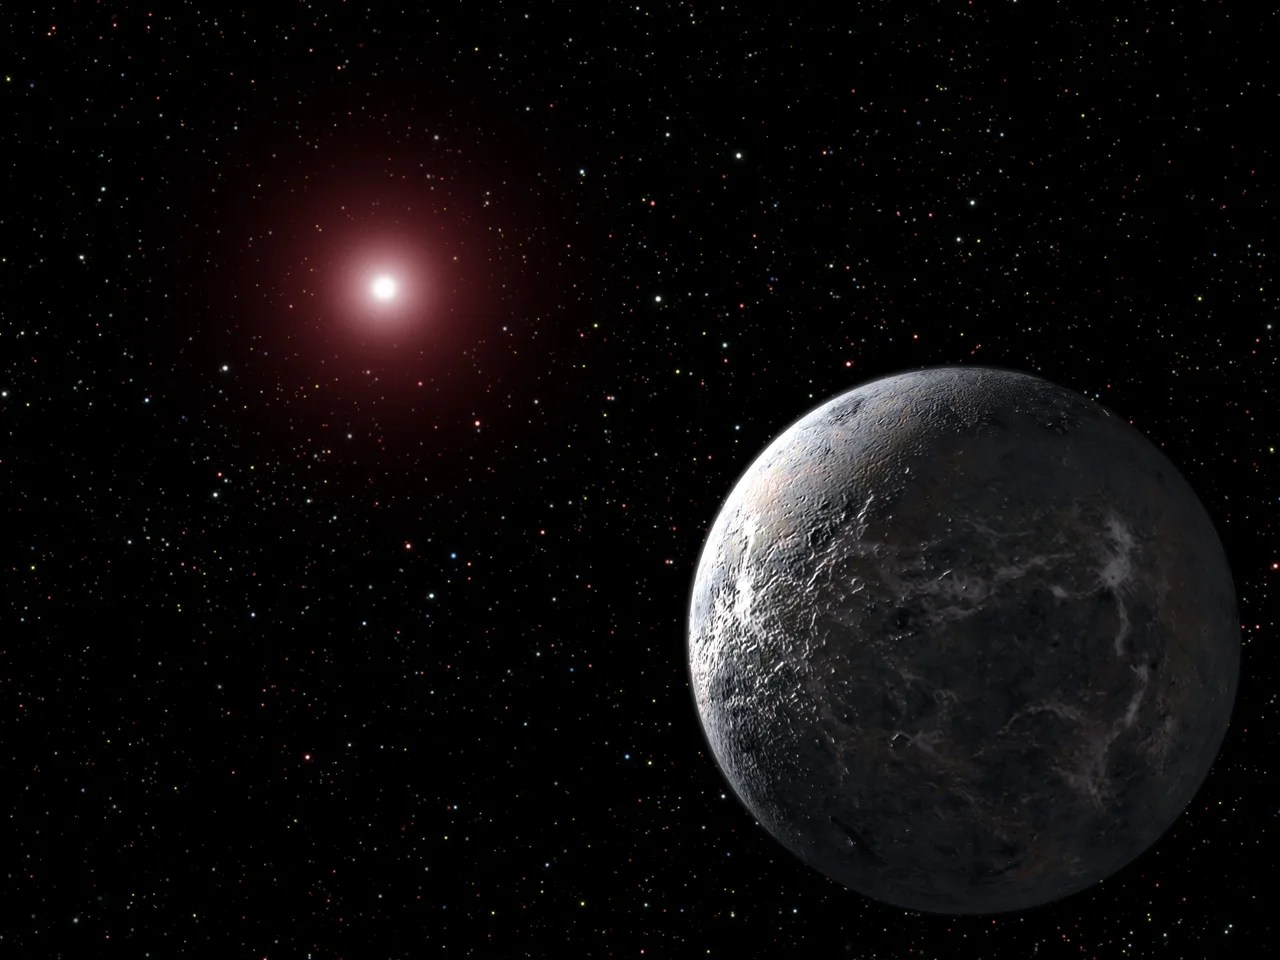 Illustration of icy world orbiting distant star. Black background with a bright whitish-red star at upper left. A terrestrial-type planet is at lower right.